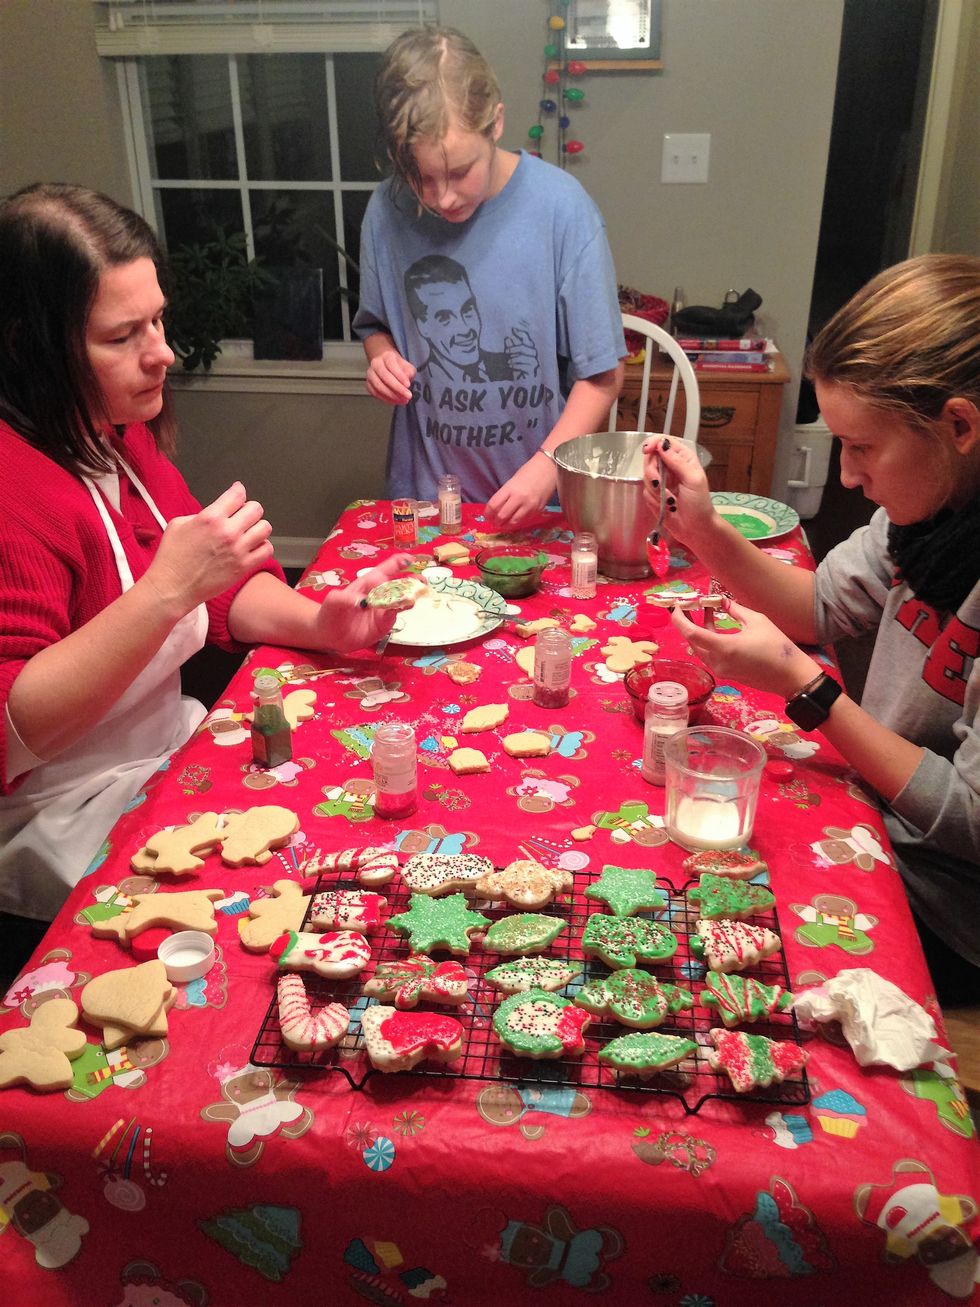 5 Non-Conventional Christmas Traditions That My Family Celebrates